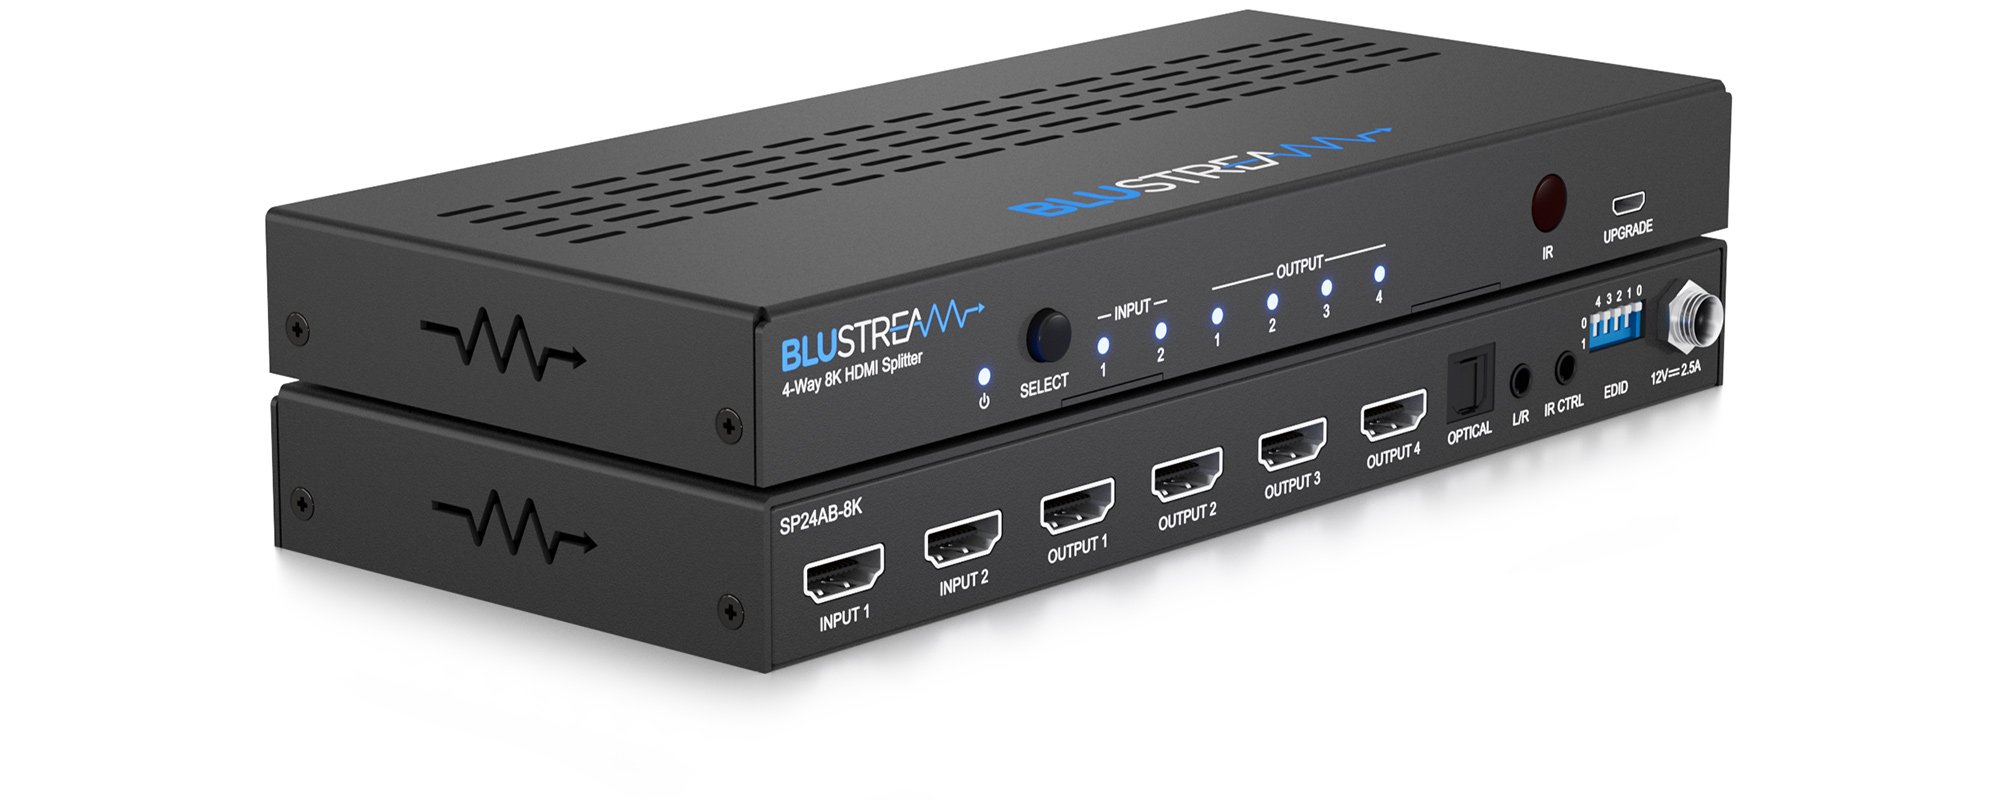 Blustream 2 Input 4-Way 8K HDMI2.3 Splitter with Audio Breakout, and EDID